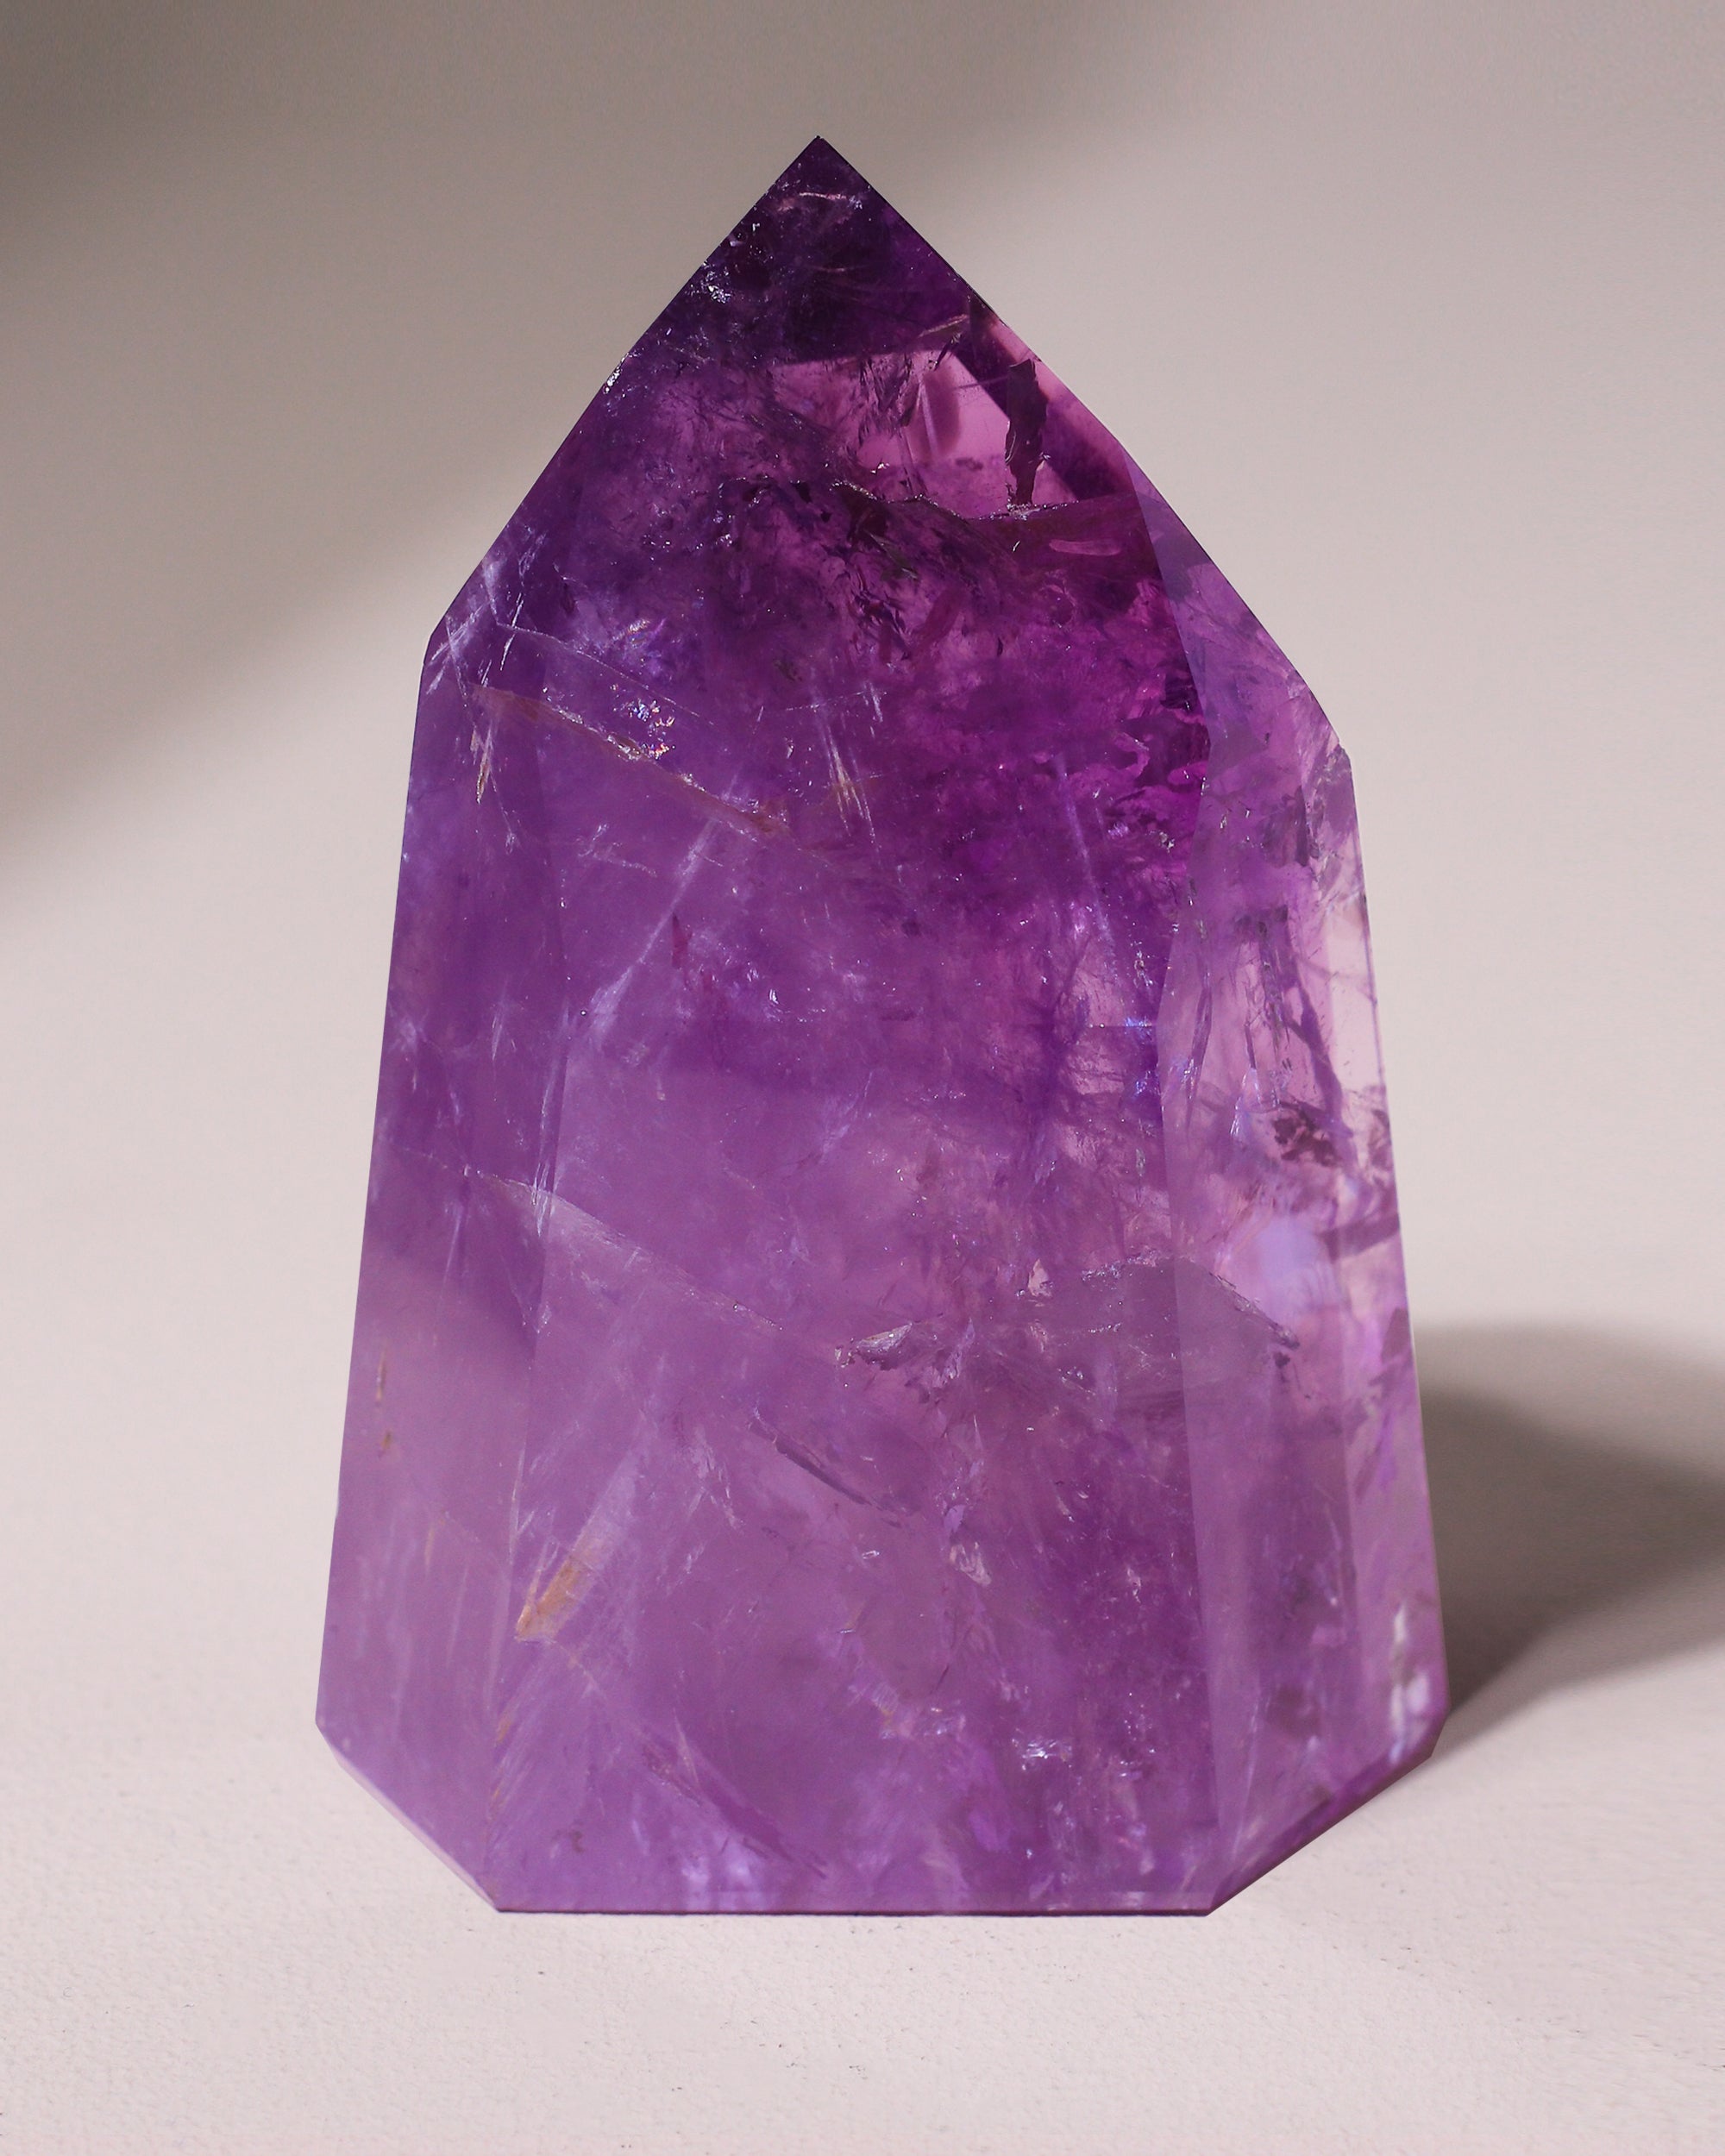 Smoky Amethyst tip, one of a kind